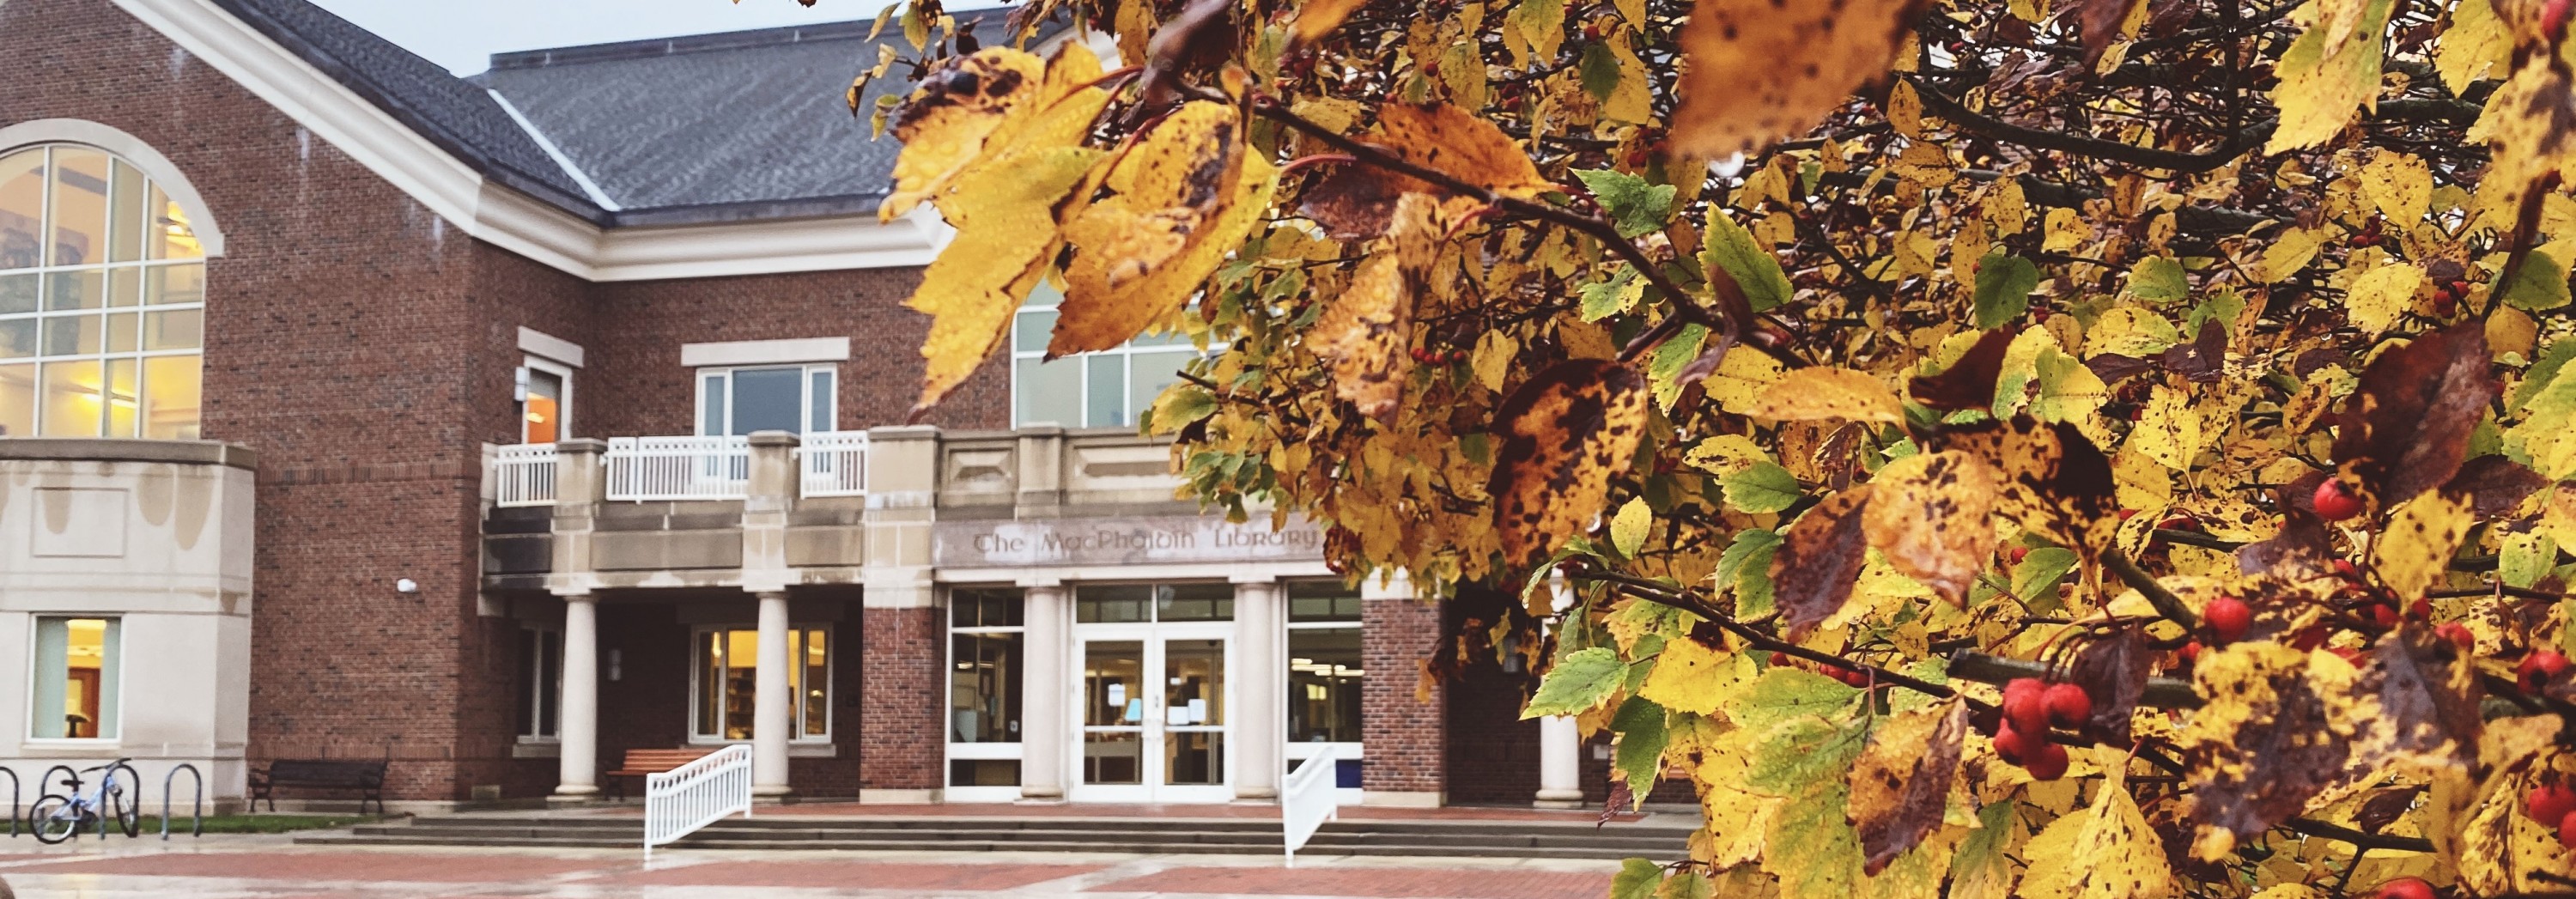 Exterior of library in the fall